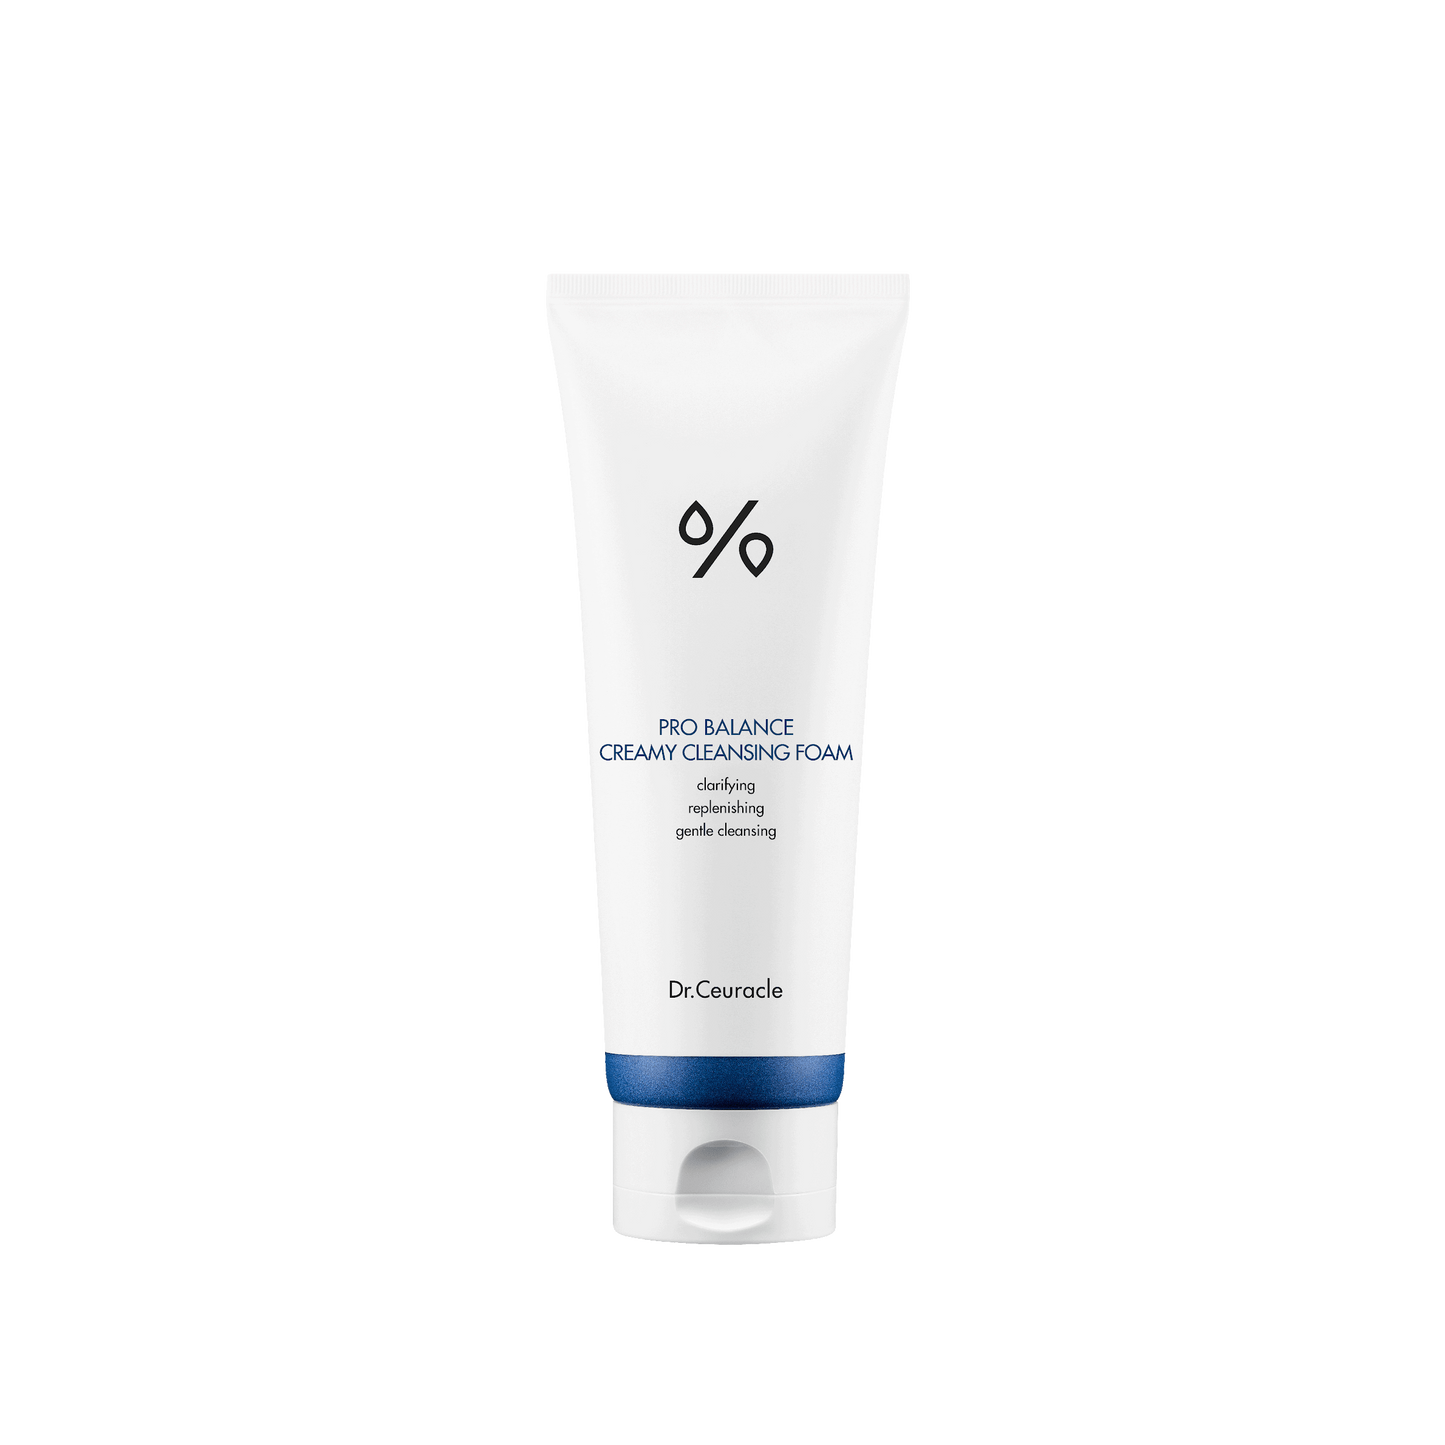 Dr. Ceuracle Pro Balance Creamy Cleansing Foam 150g